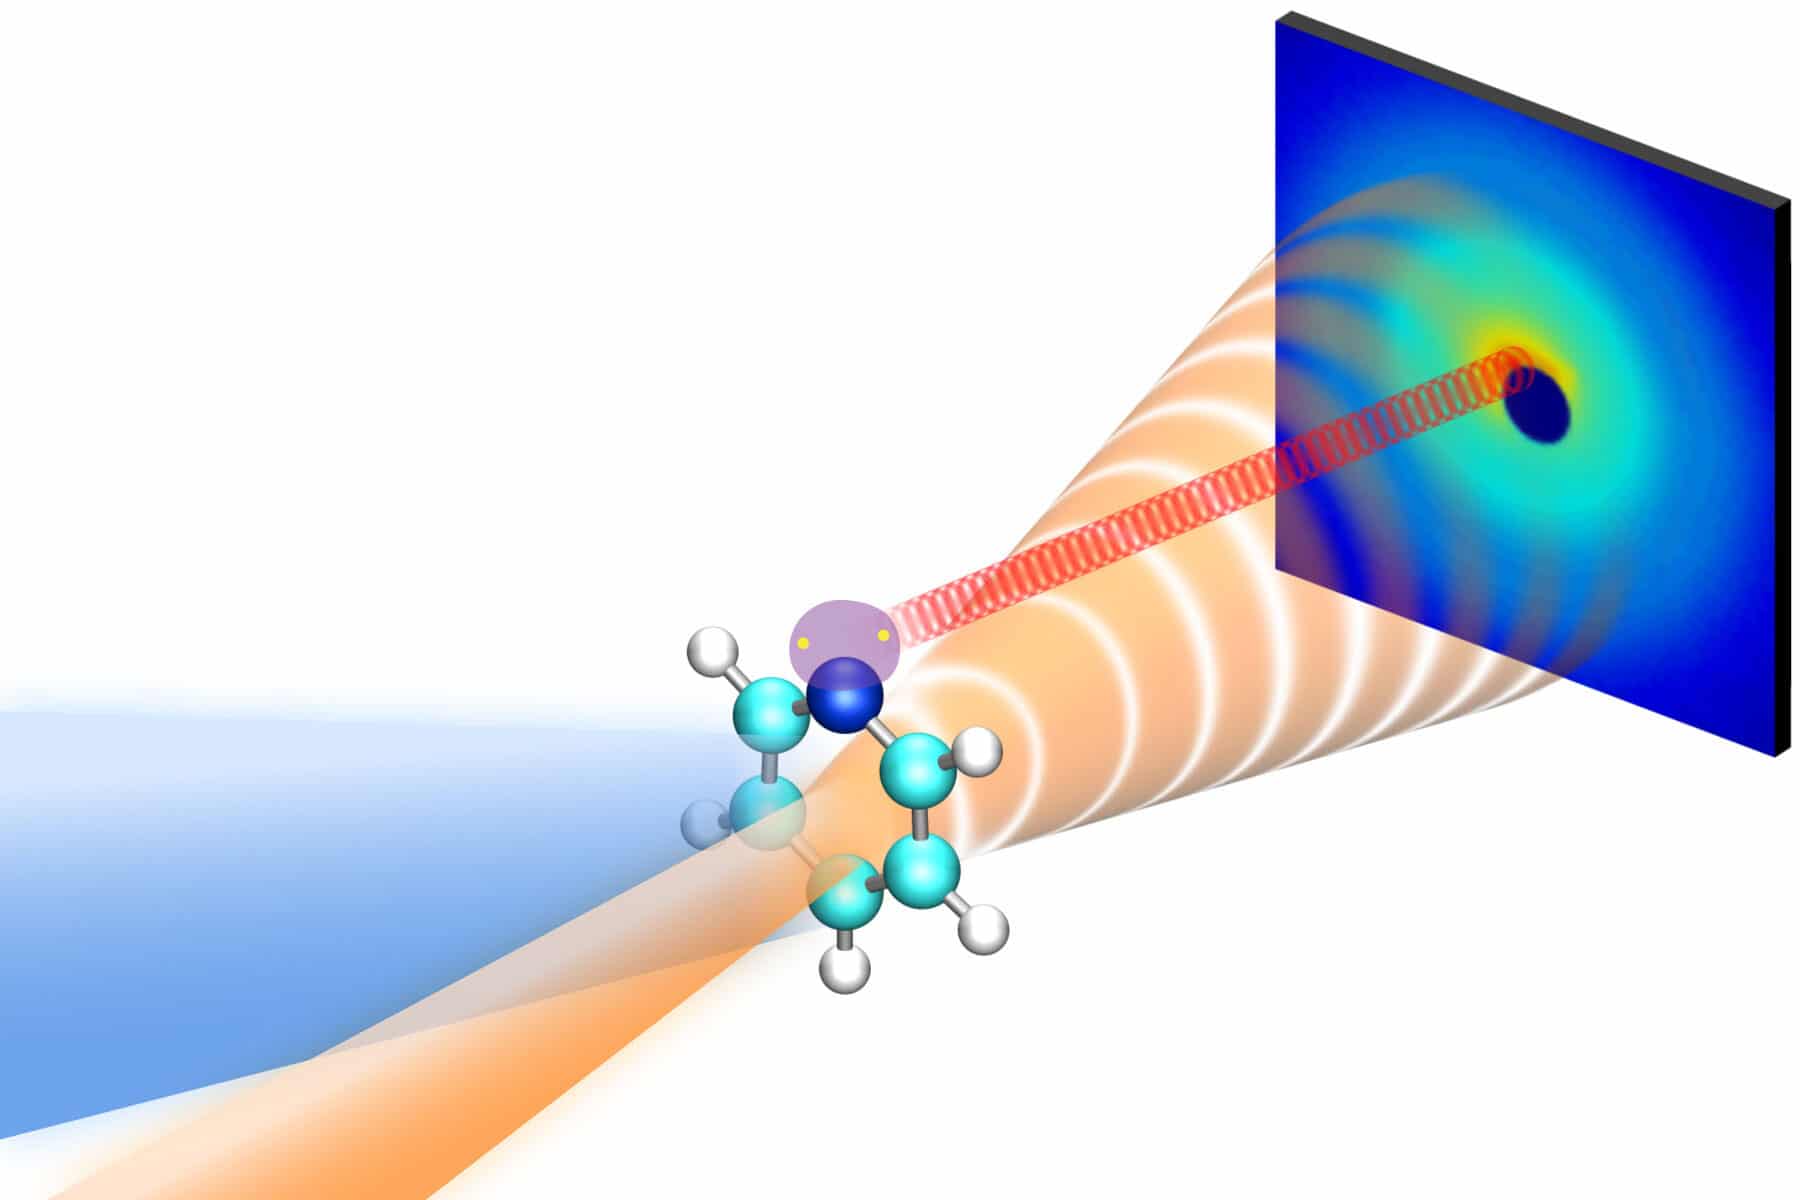 With previous methods, researchers could watch the nitrogen atom in a pyridine molecule bend up and down when excited by light. With this new method, they were also able to see changes in electron density happening at the same time. Blue bubbles depict decreasing electron density while red show increasing relative to unexcited pyridine. (Jimmy Yu/Stanford University)